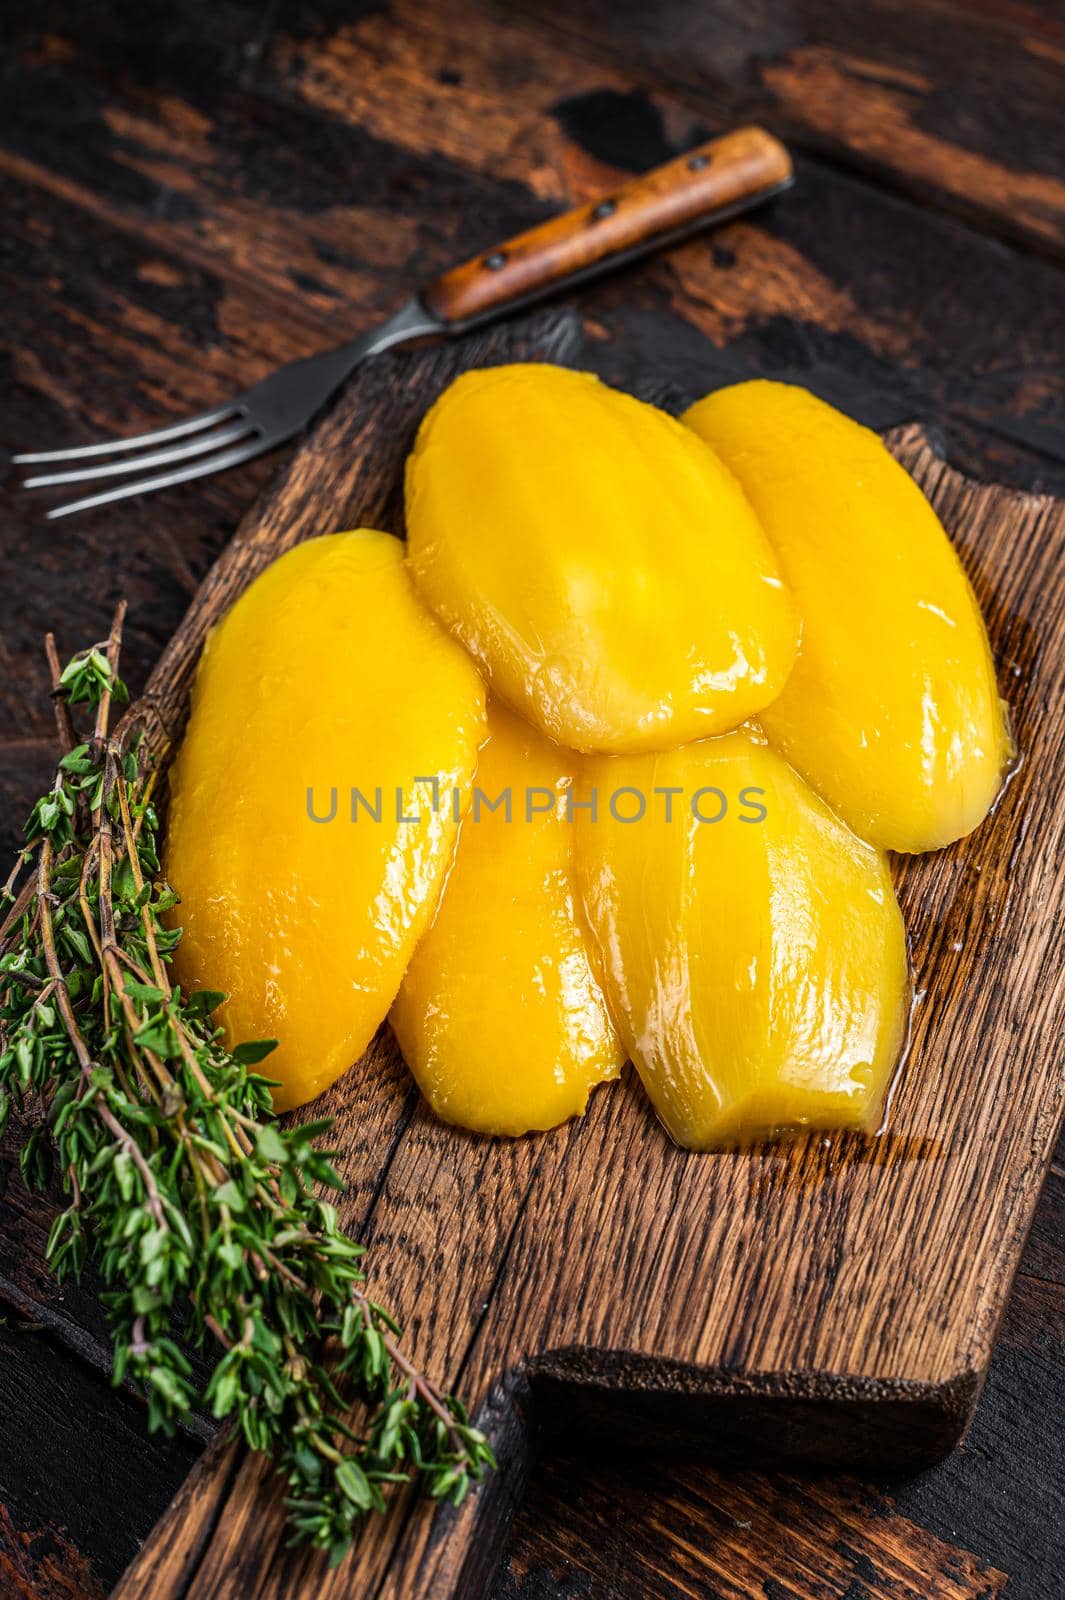 Preserve mango slices on a wooden board. Dark wooden background. Top view by Composter